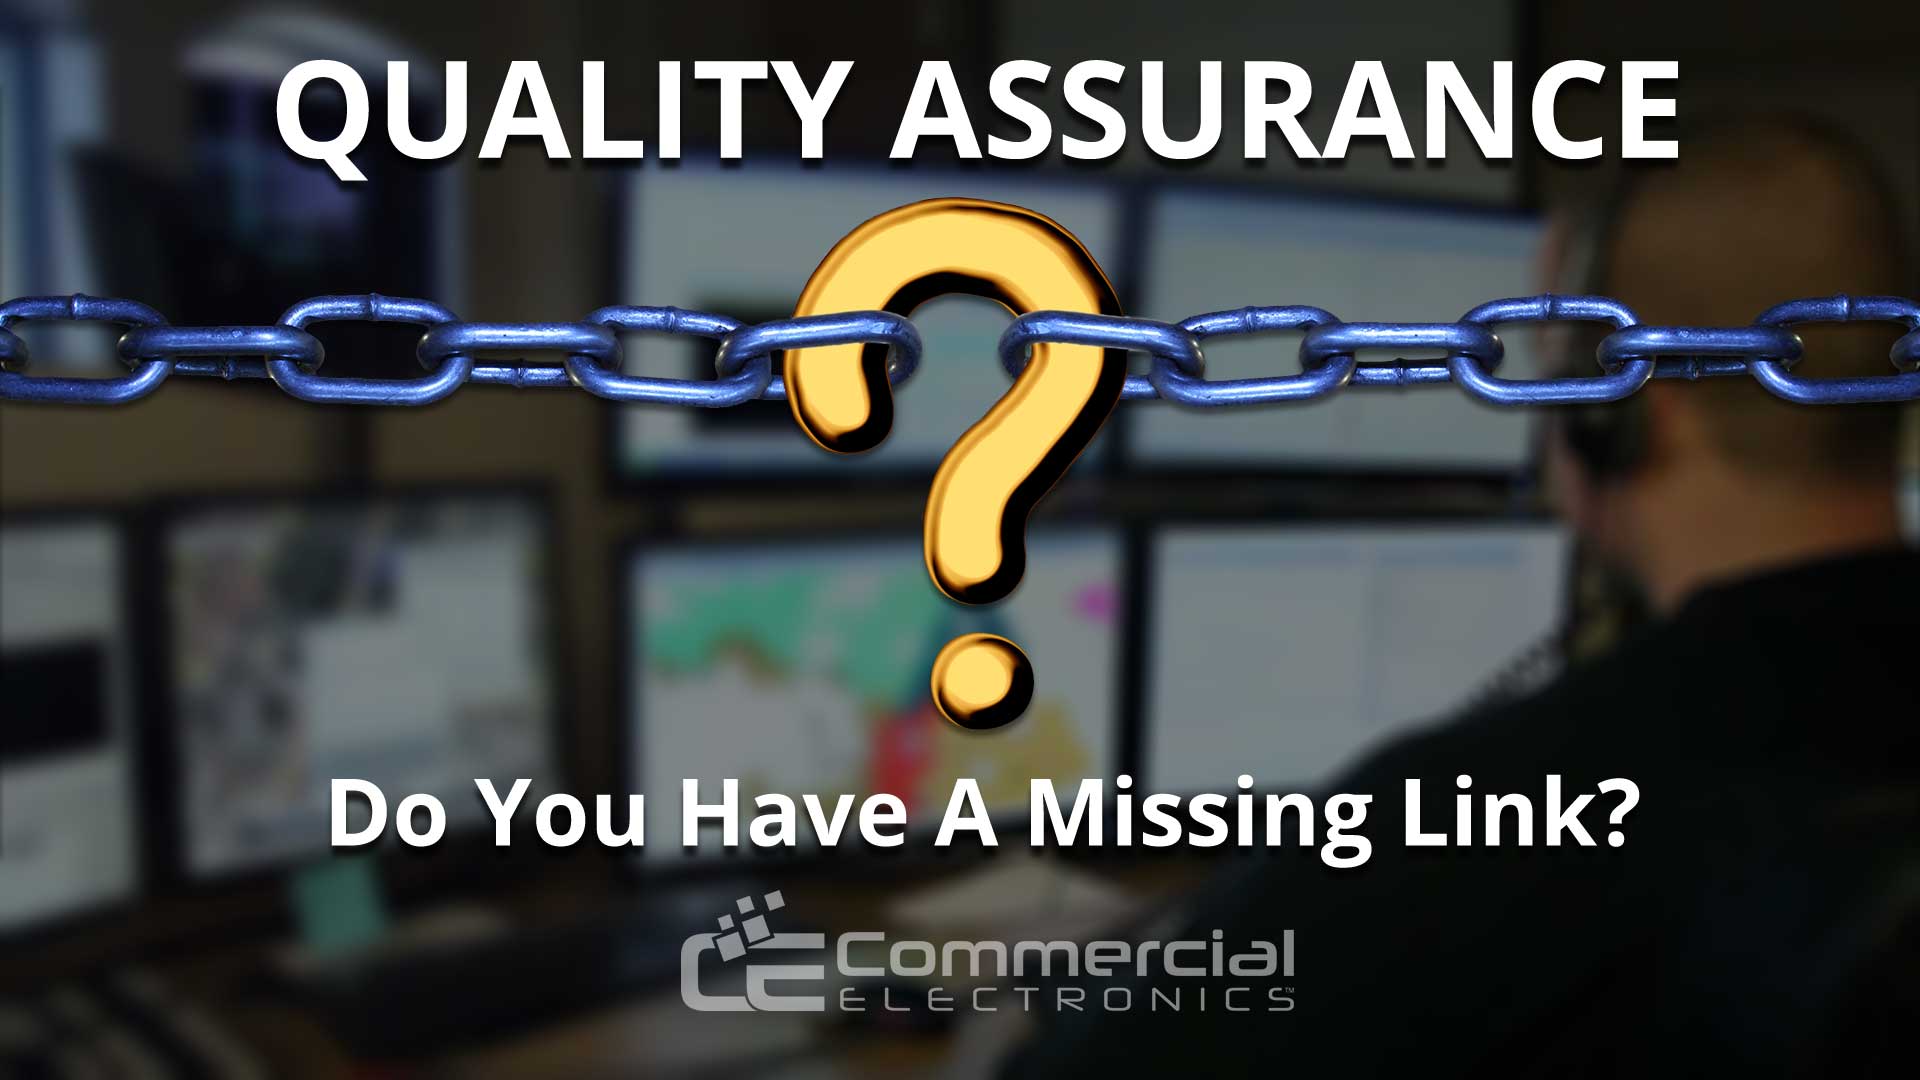 Quality Assurance Do You Have A Missing Link